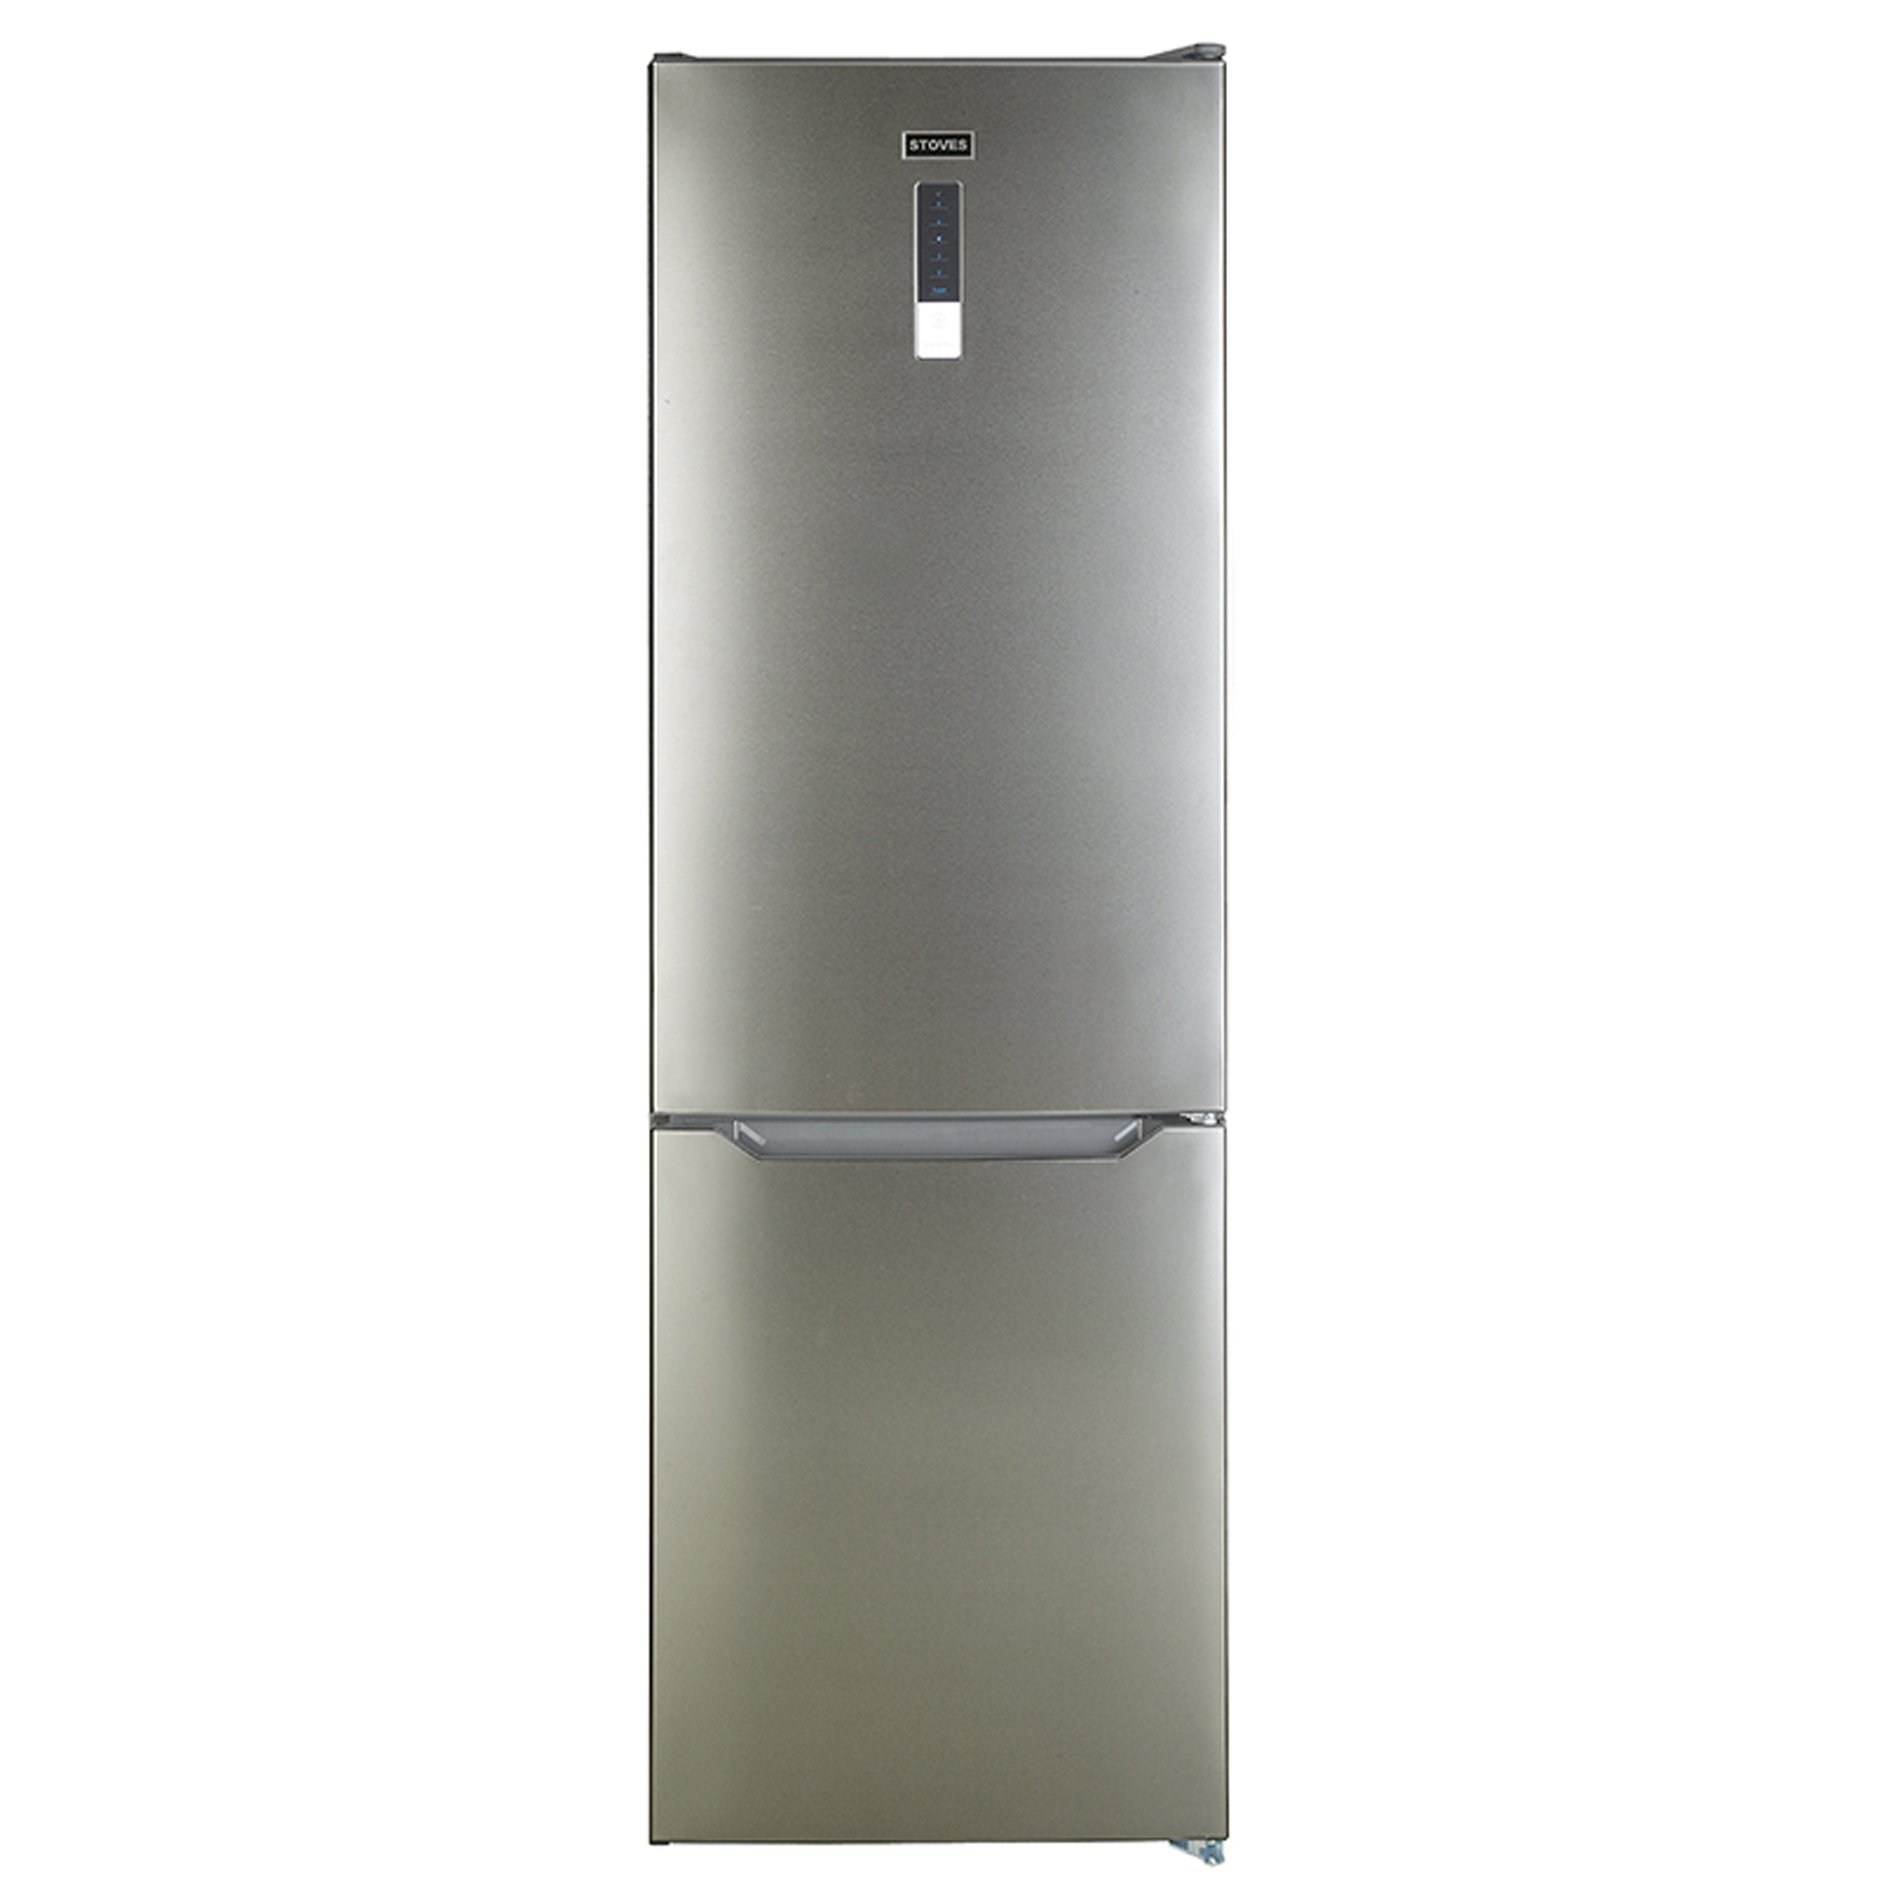 The 295L fridge freezer can hold up to 16 bags of food shopping making it an ideal choice for medium/large households. Features 4* Frost Free freezer. 